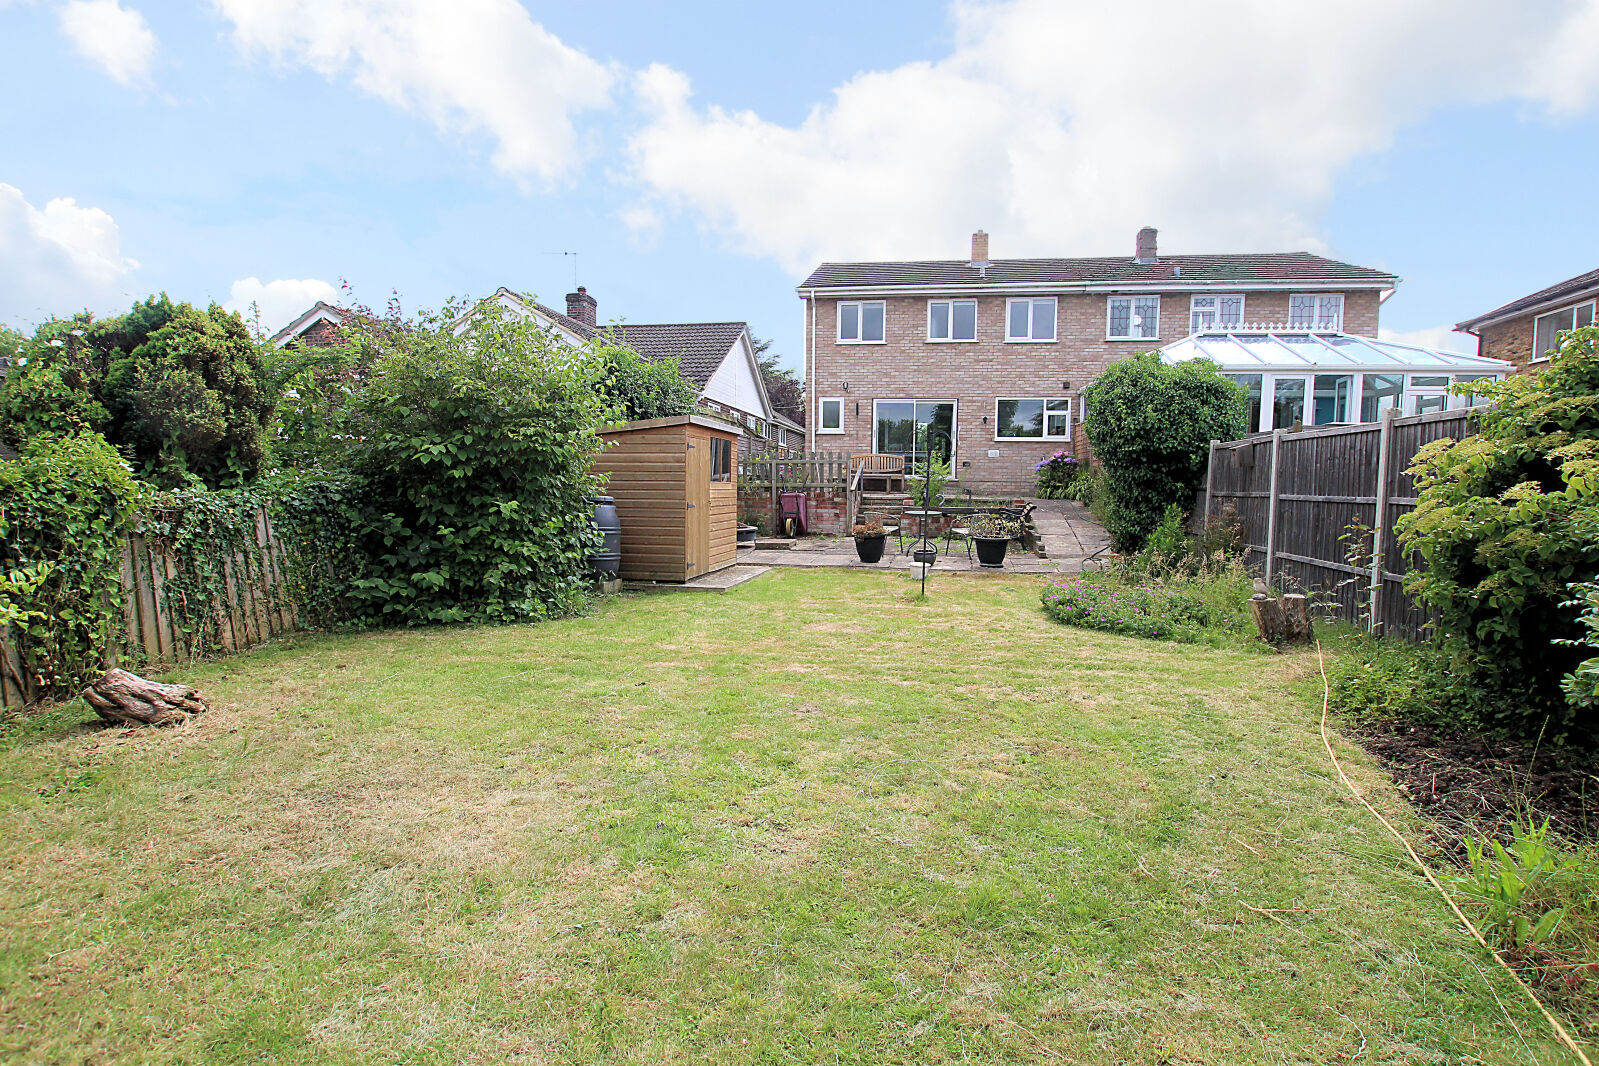 4 bedroom semi detached house for sale Wintringham Way, Purley on Thames, RG8, main image